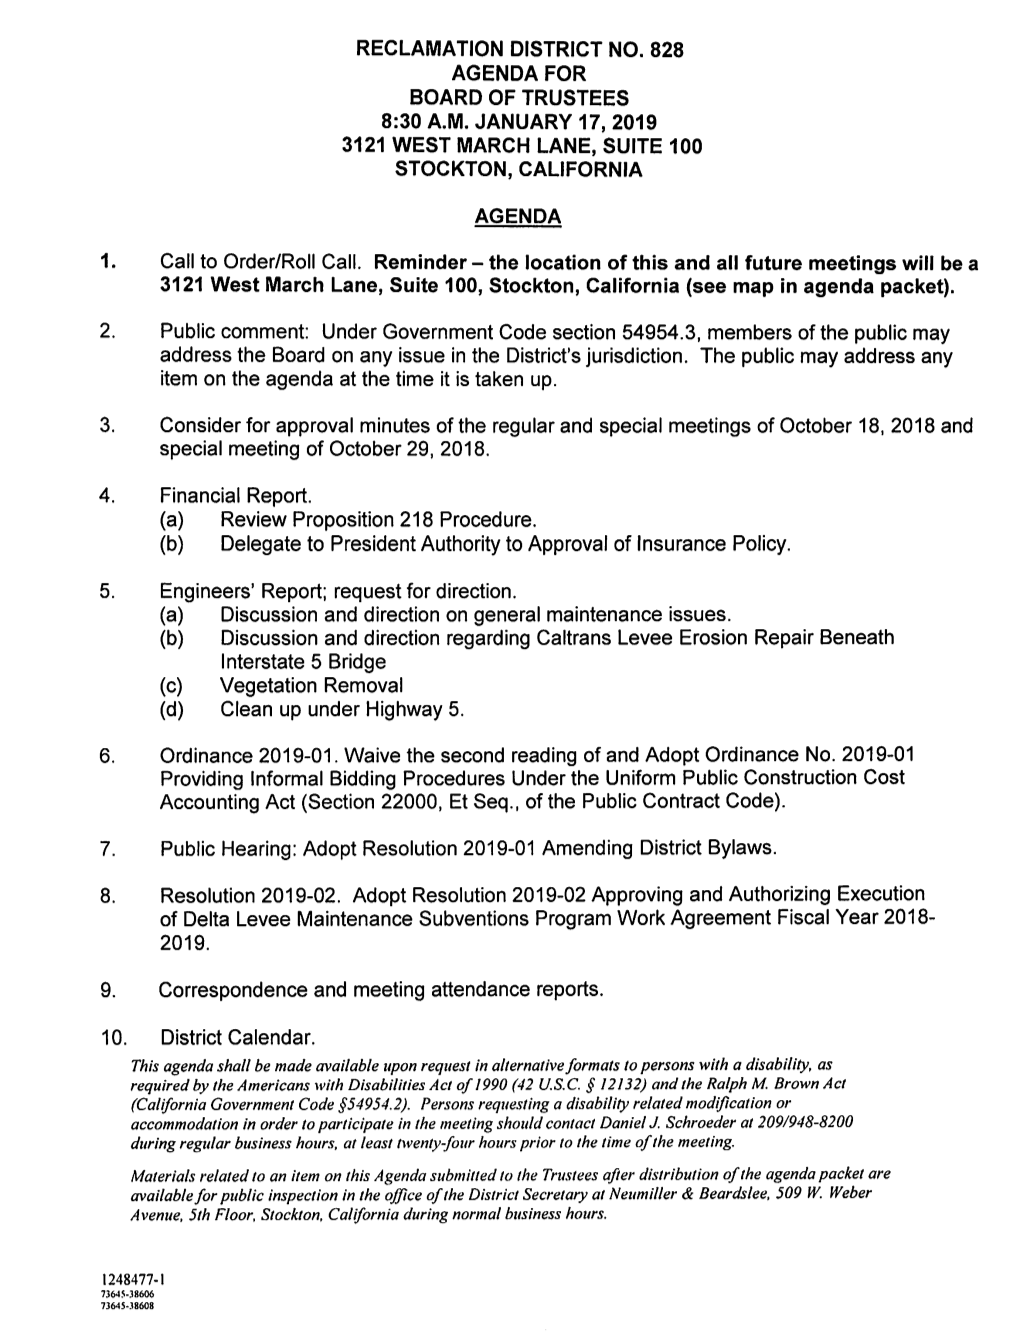 Reclamation District No. 828 Agenda for Board of Trustees 8:30 A.M